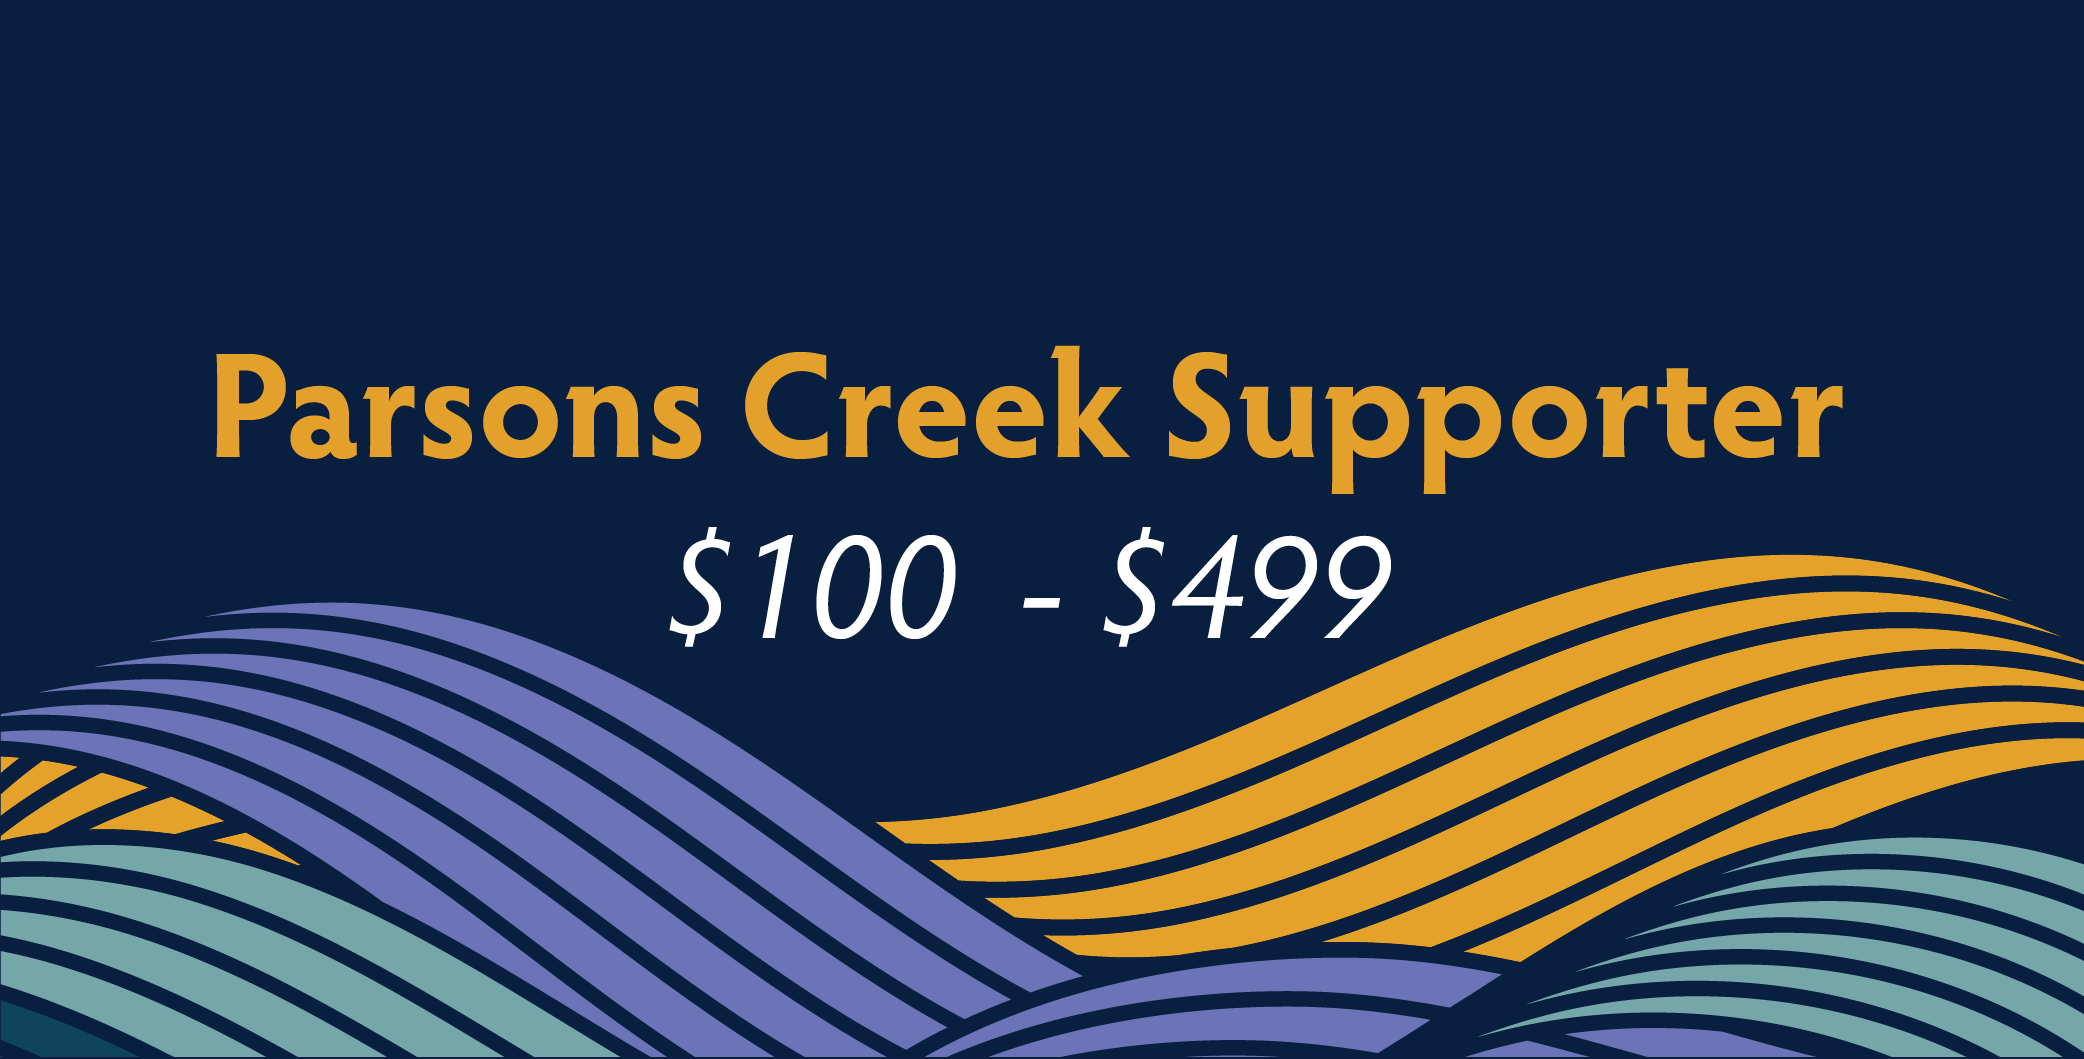 Parsons Creek Supporter